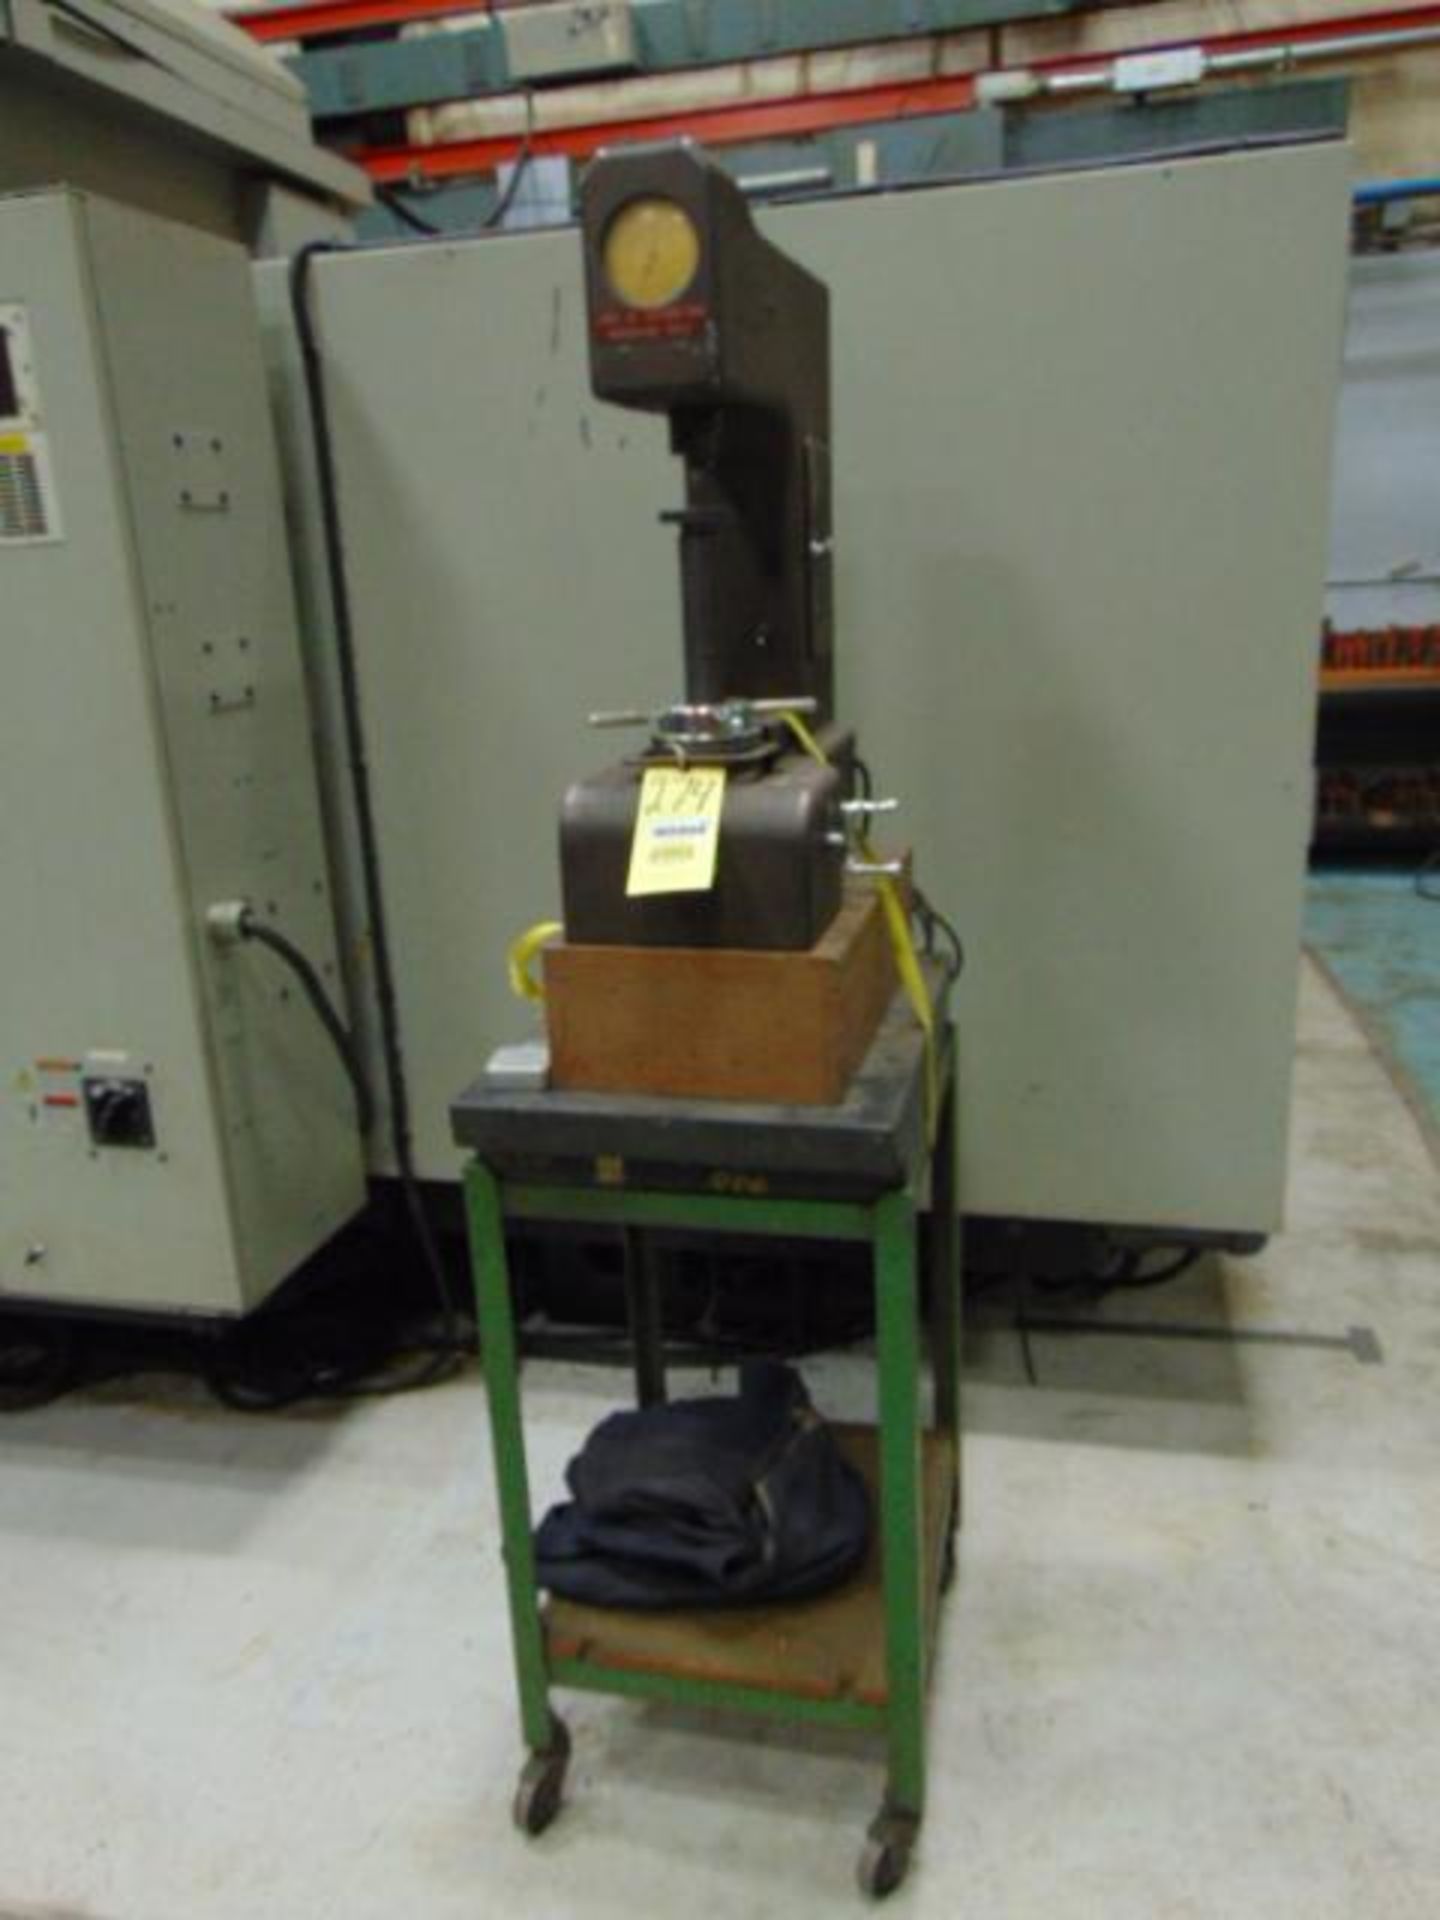 HARDNESS TESTER, SERVICE DIAMOND TOOL CO. MDL. 8A, w/ 24"x 18" x 4-1/4" granite surface plate, & ste